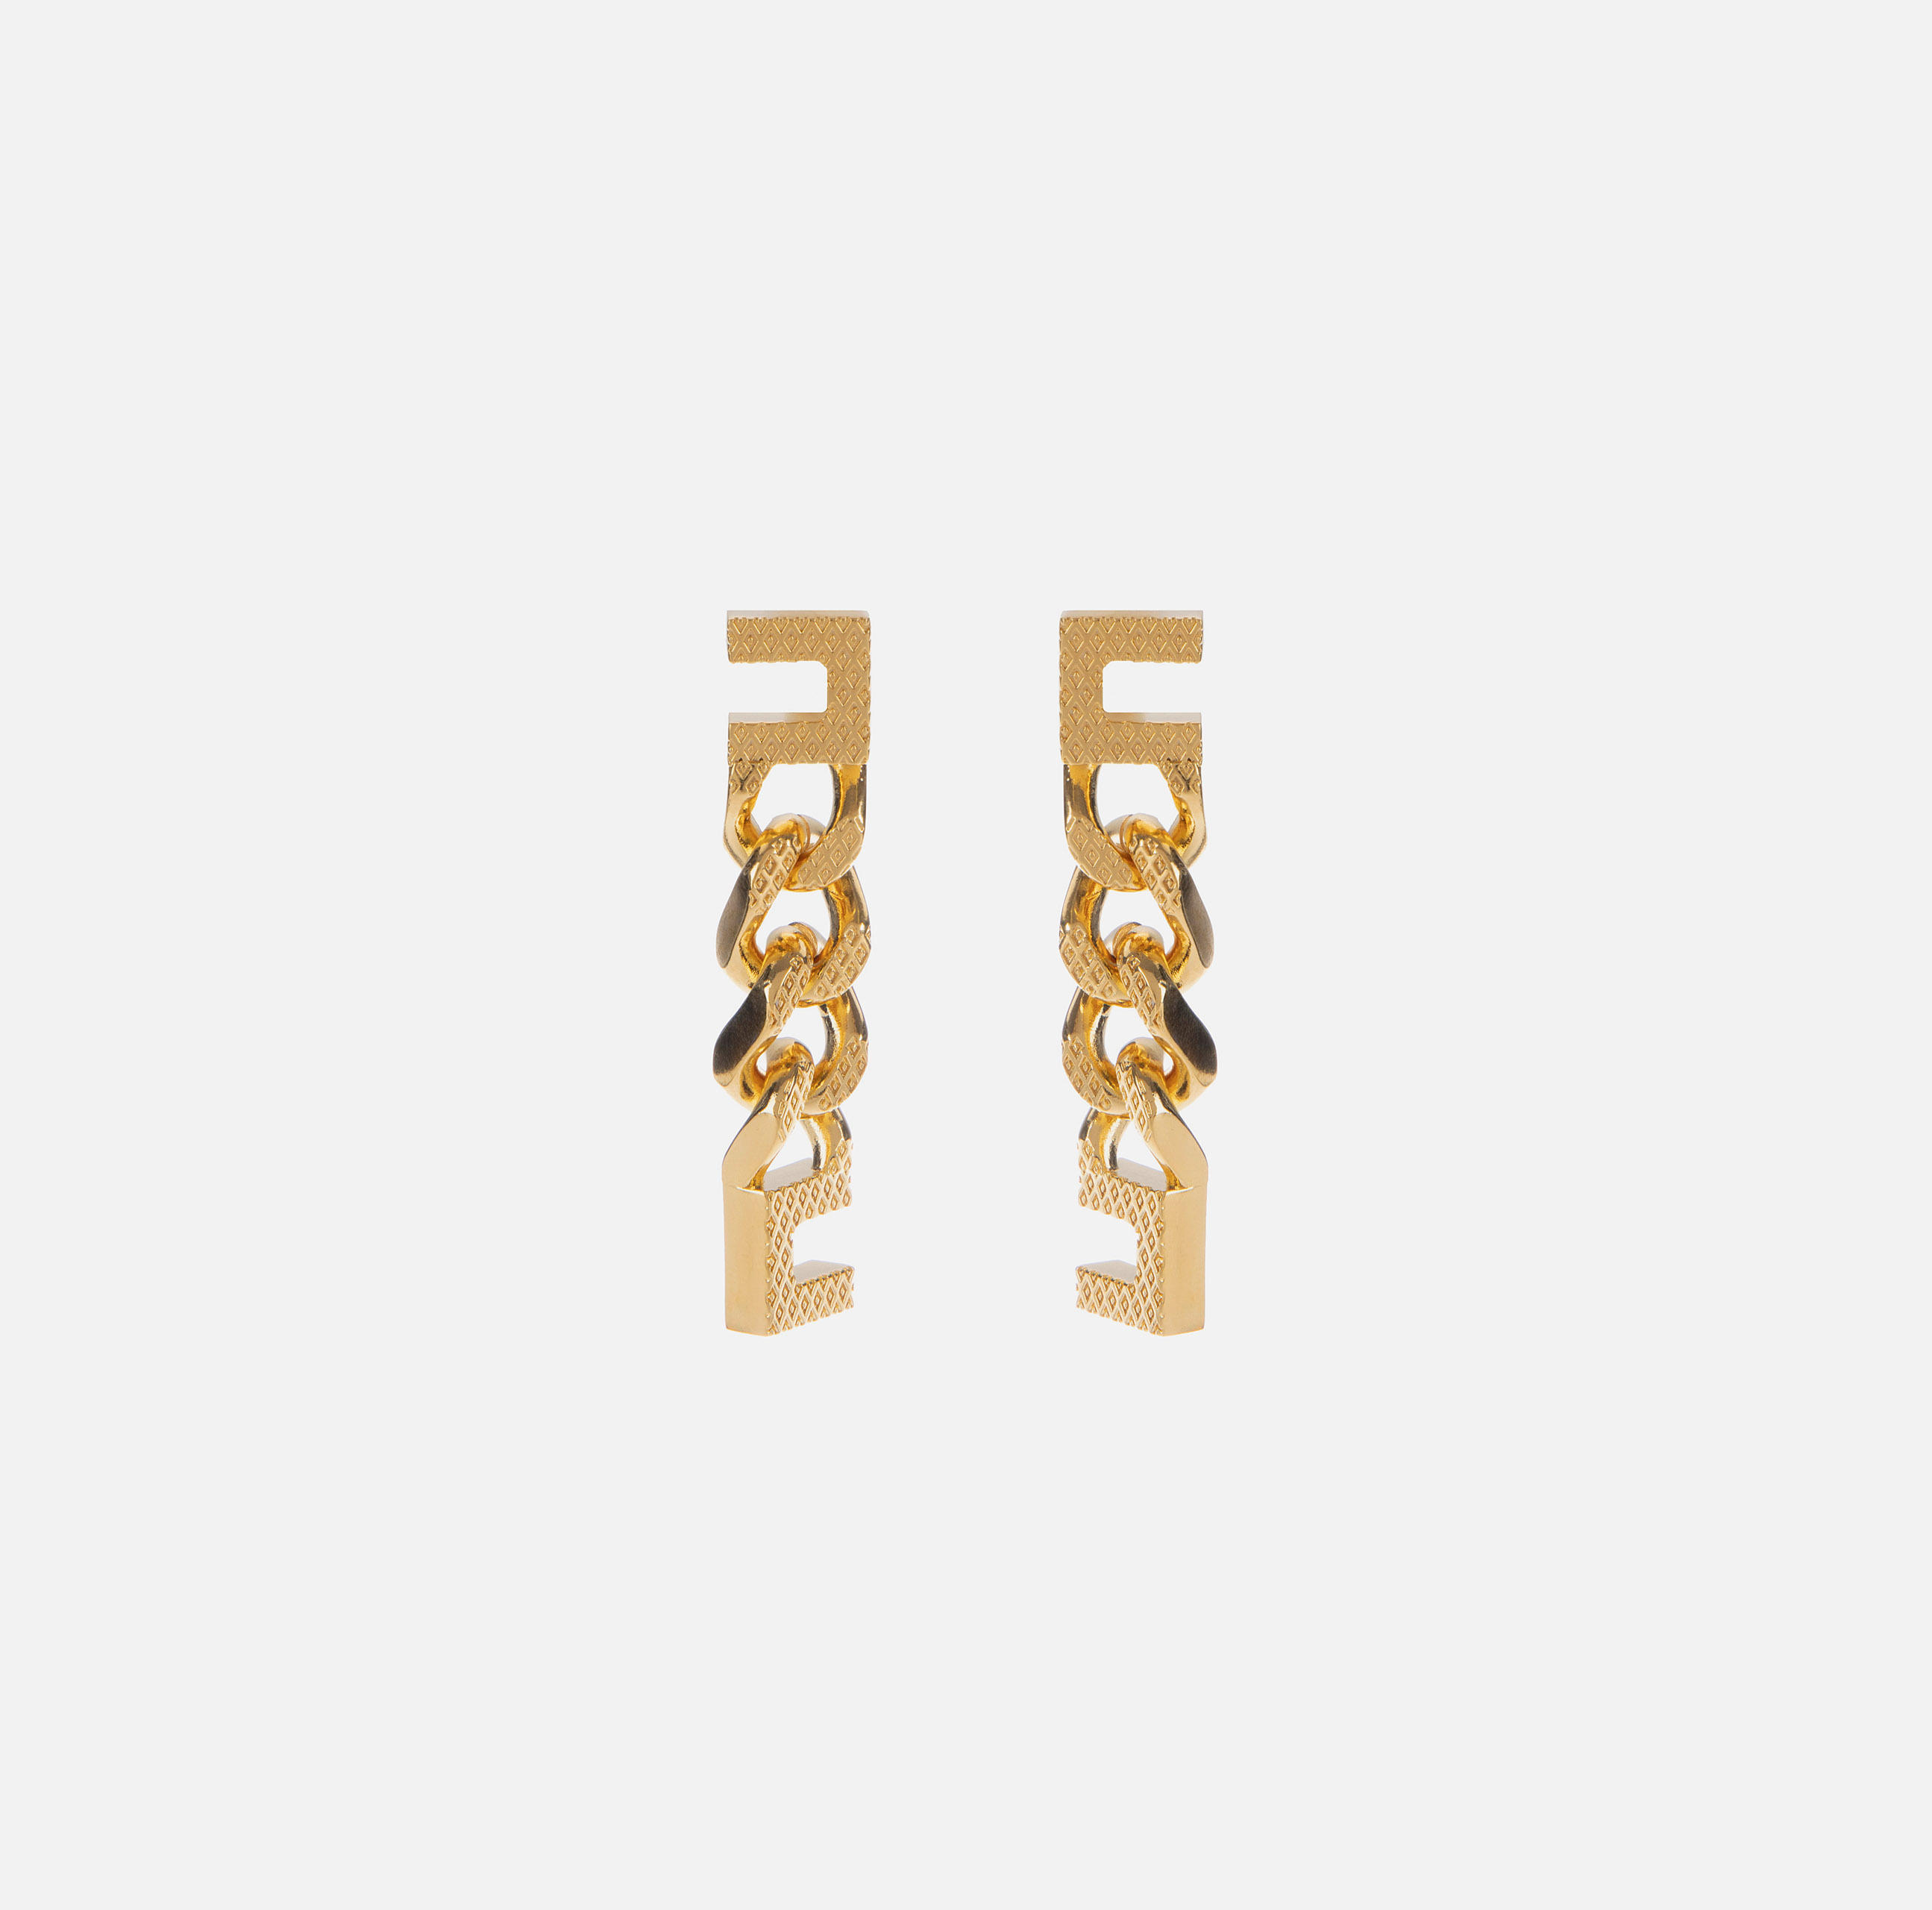 Pendant earrings with knurled groumette chain - Elisabetta Franchi